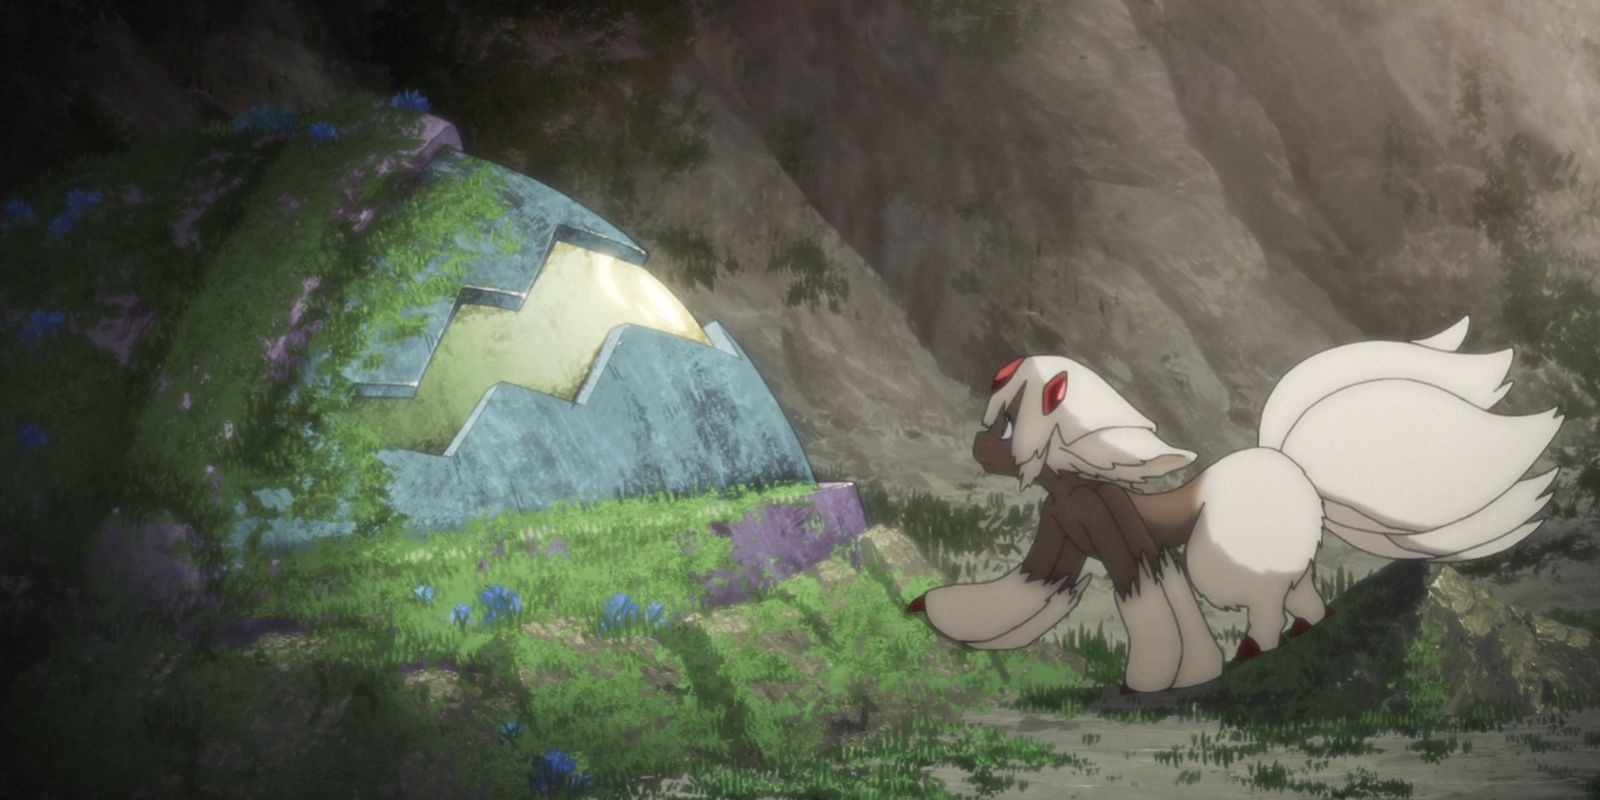 Made in Abyss Ep. 10-12 Review: Now this is how you handle gore